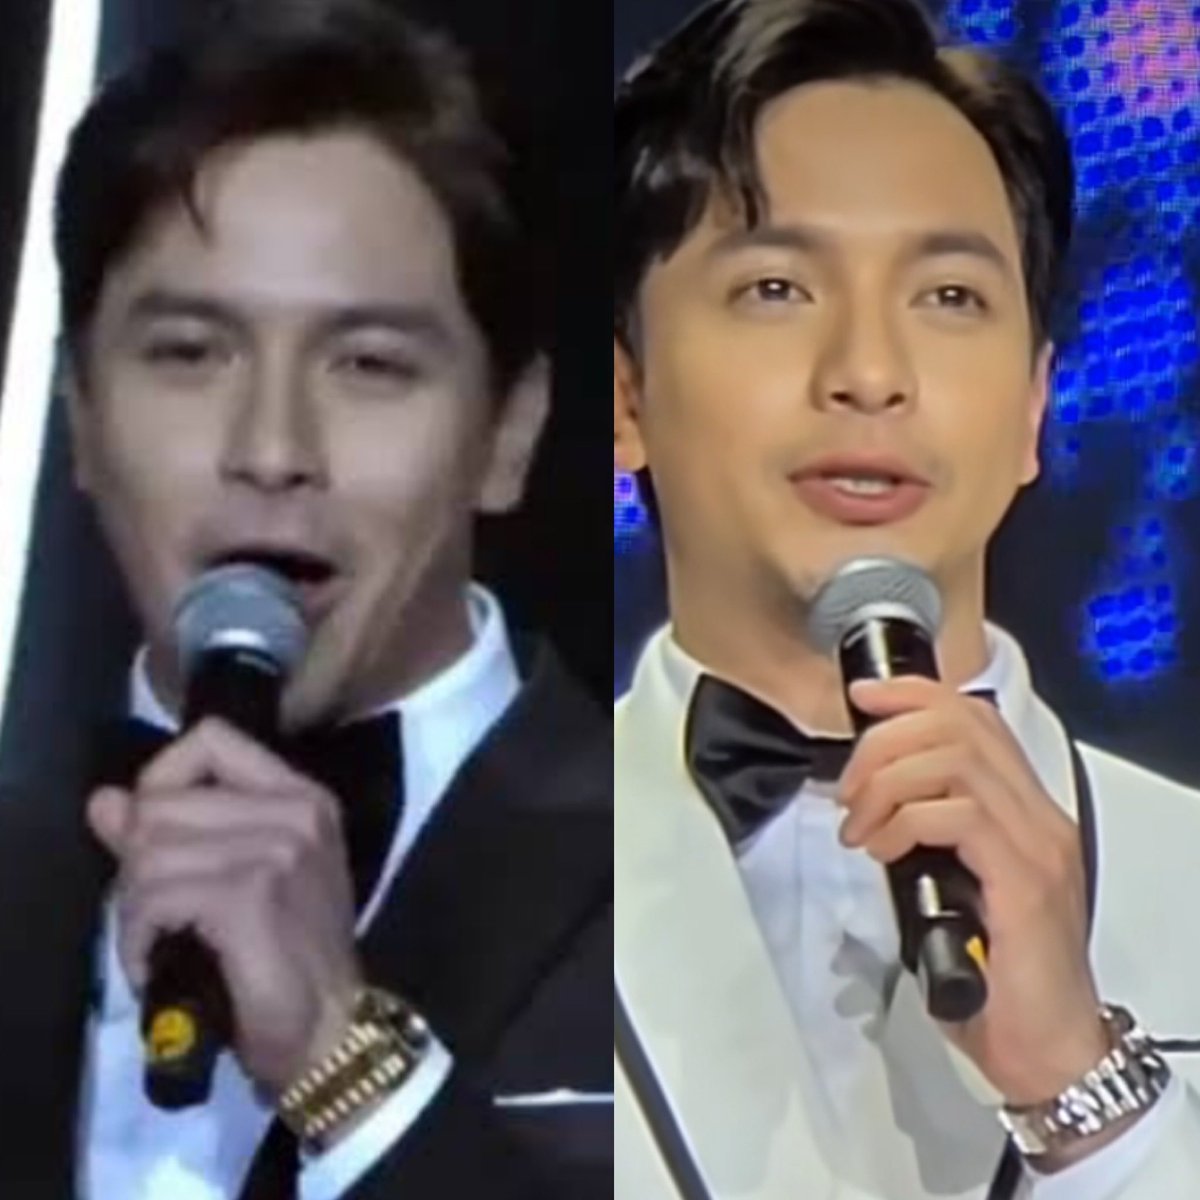 At the #MUPH2024 coronation night, the female hostess underwent several costume changes. Meanwhile, @aldenrichards02 not only changed his tuxedo but also switched his timepiece. From #Rolex to #PatekPhilippe!